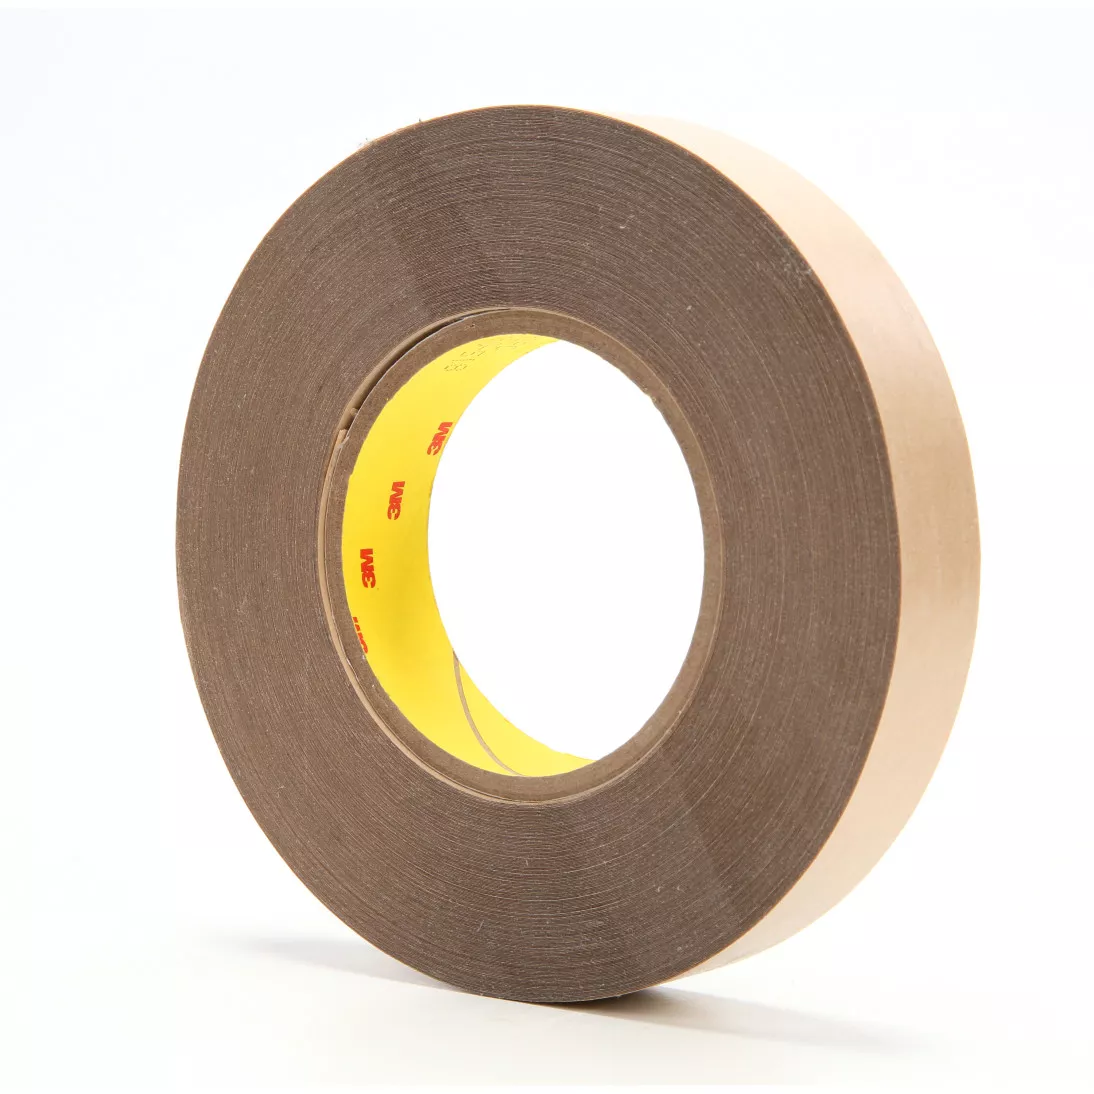 3M™ Adhesive Transfer Tape 9485PC, Clear, 1 in x 60 yd, 5 mil, 36 rolls
per case